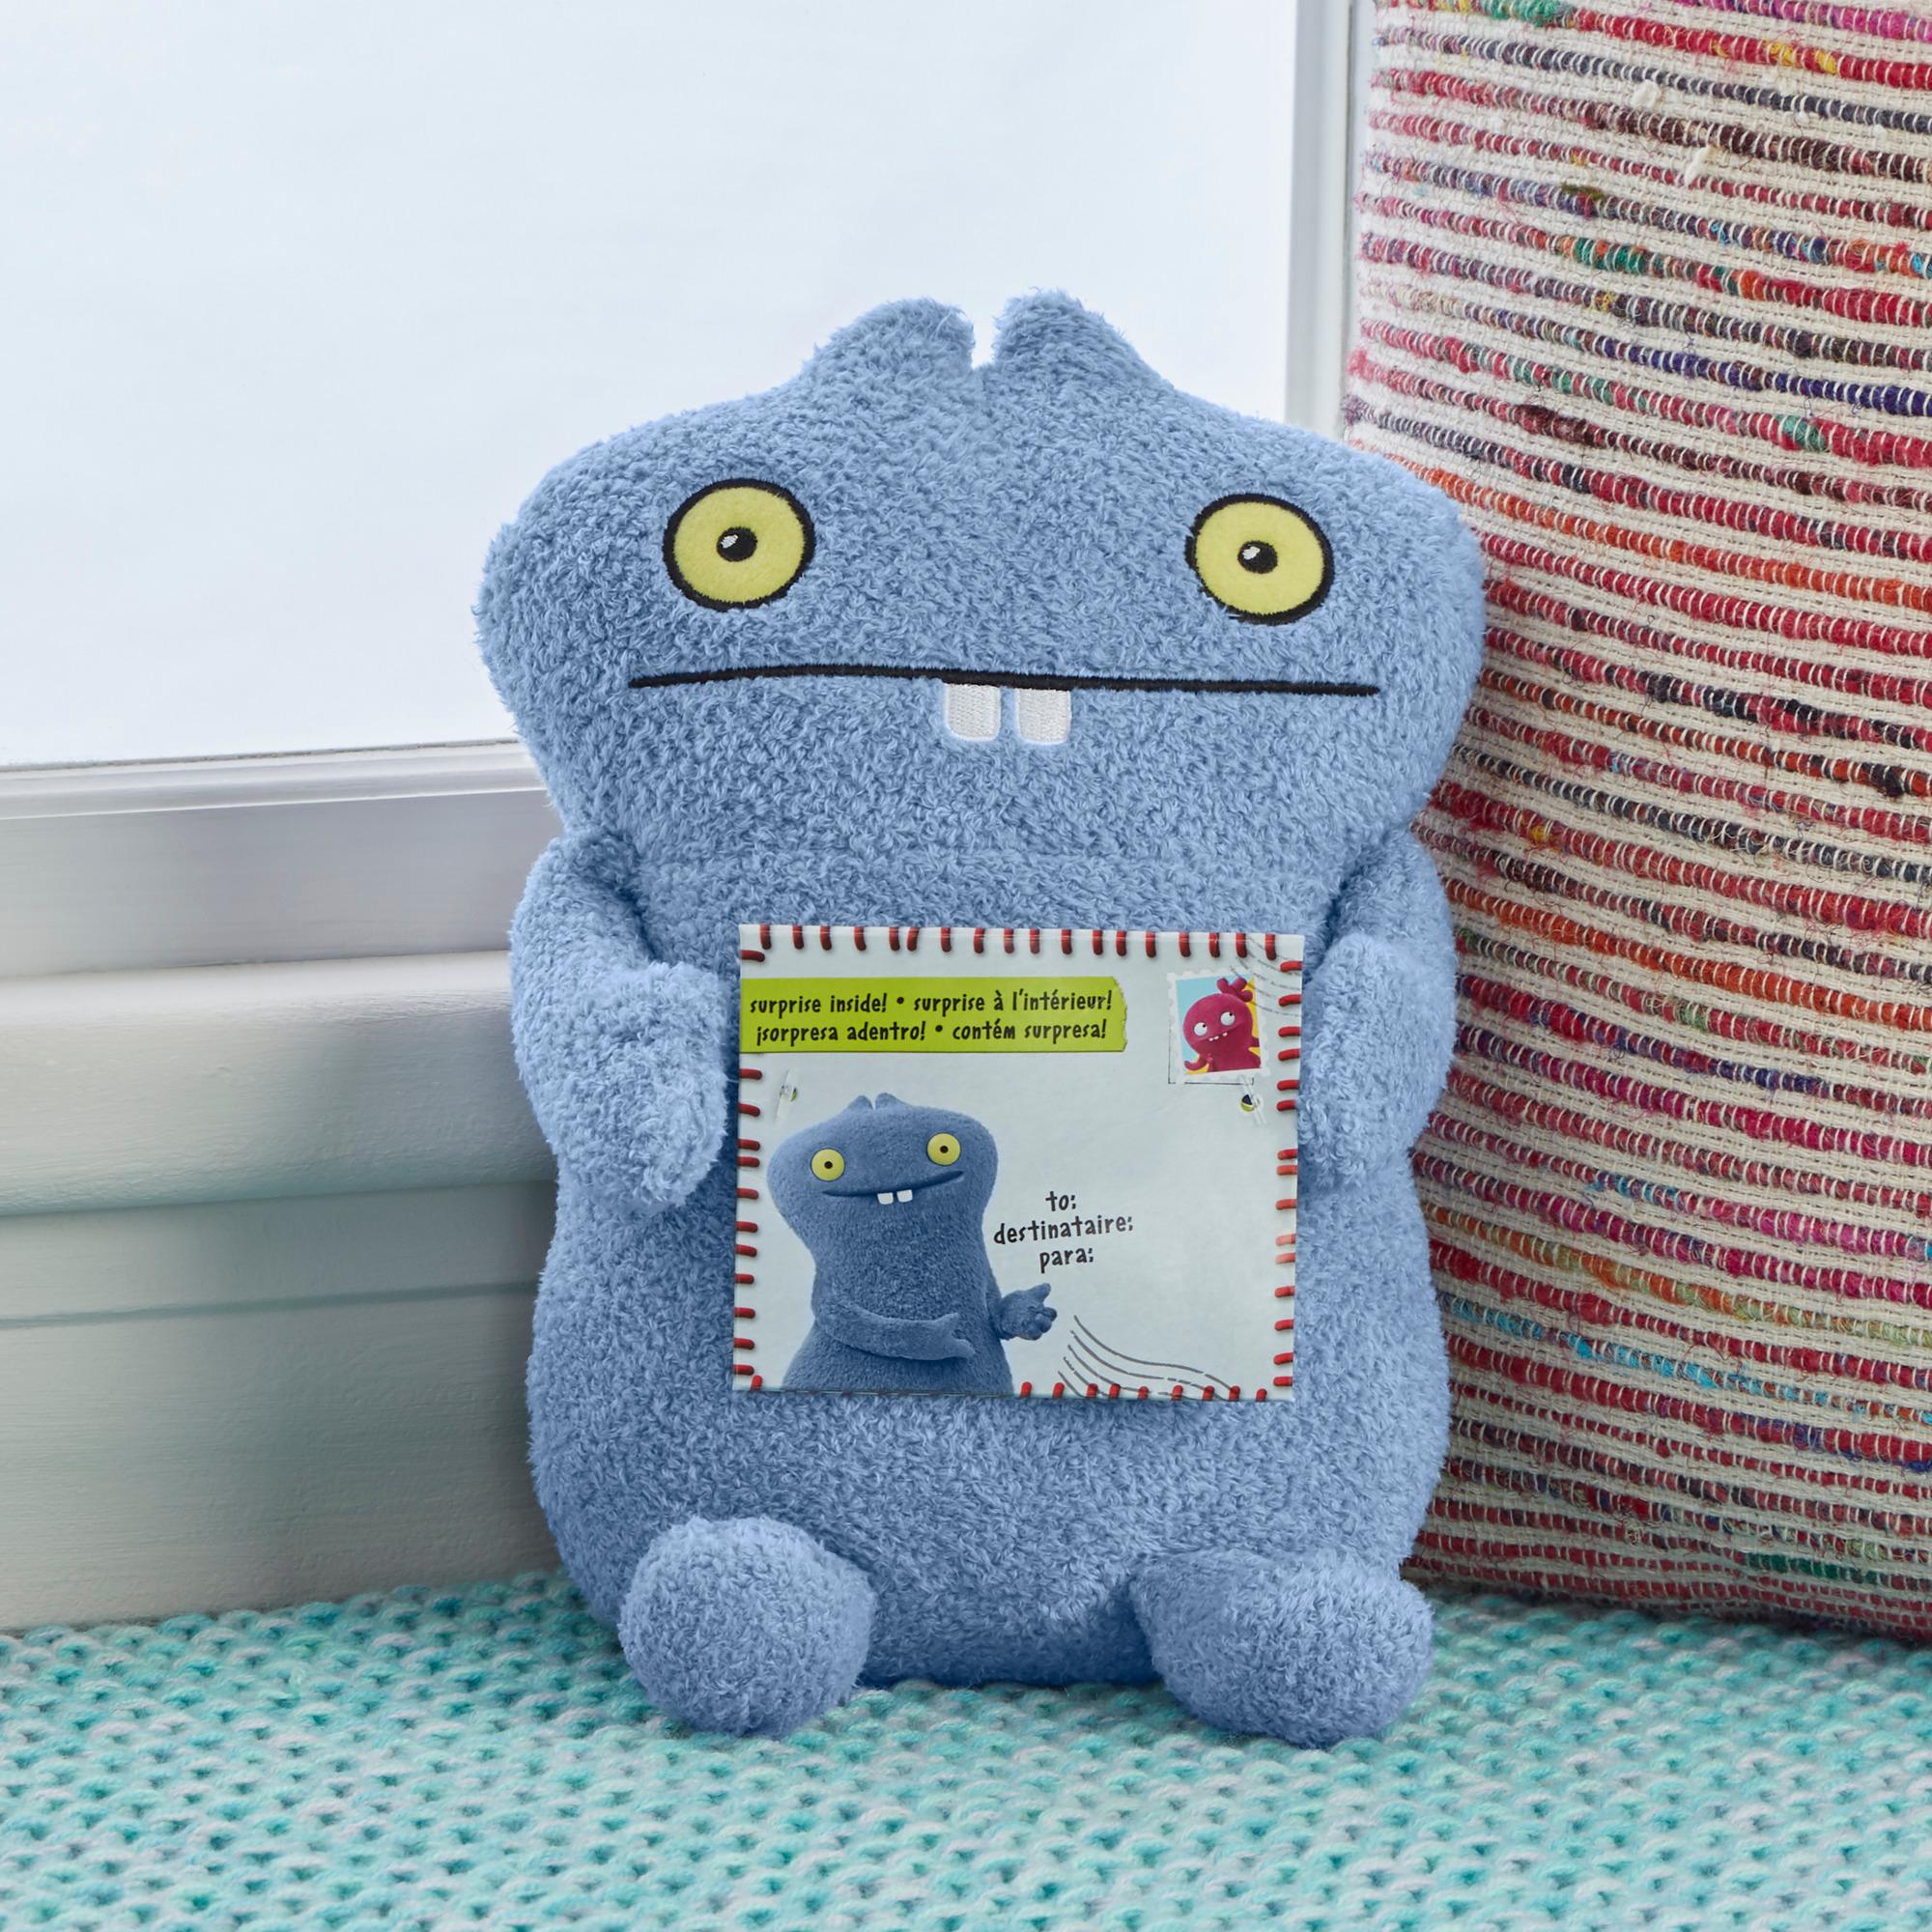 UglyDolls Hungrily Yours Babo Stuffed Plush Toy,  inches tall - Ugly  Dolls